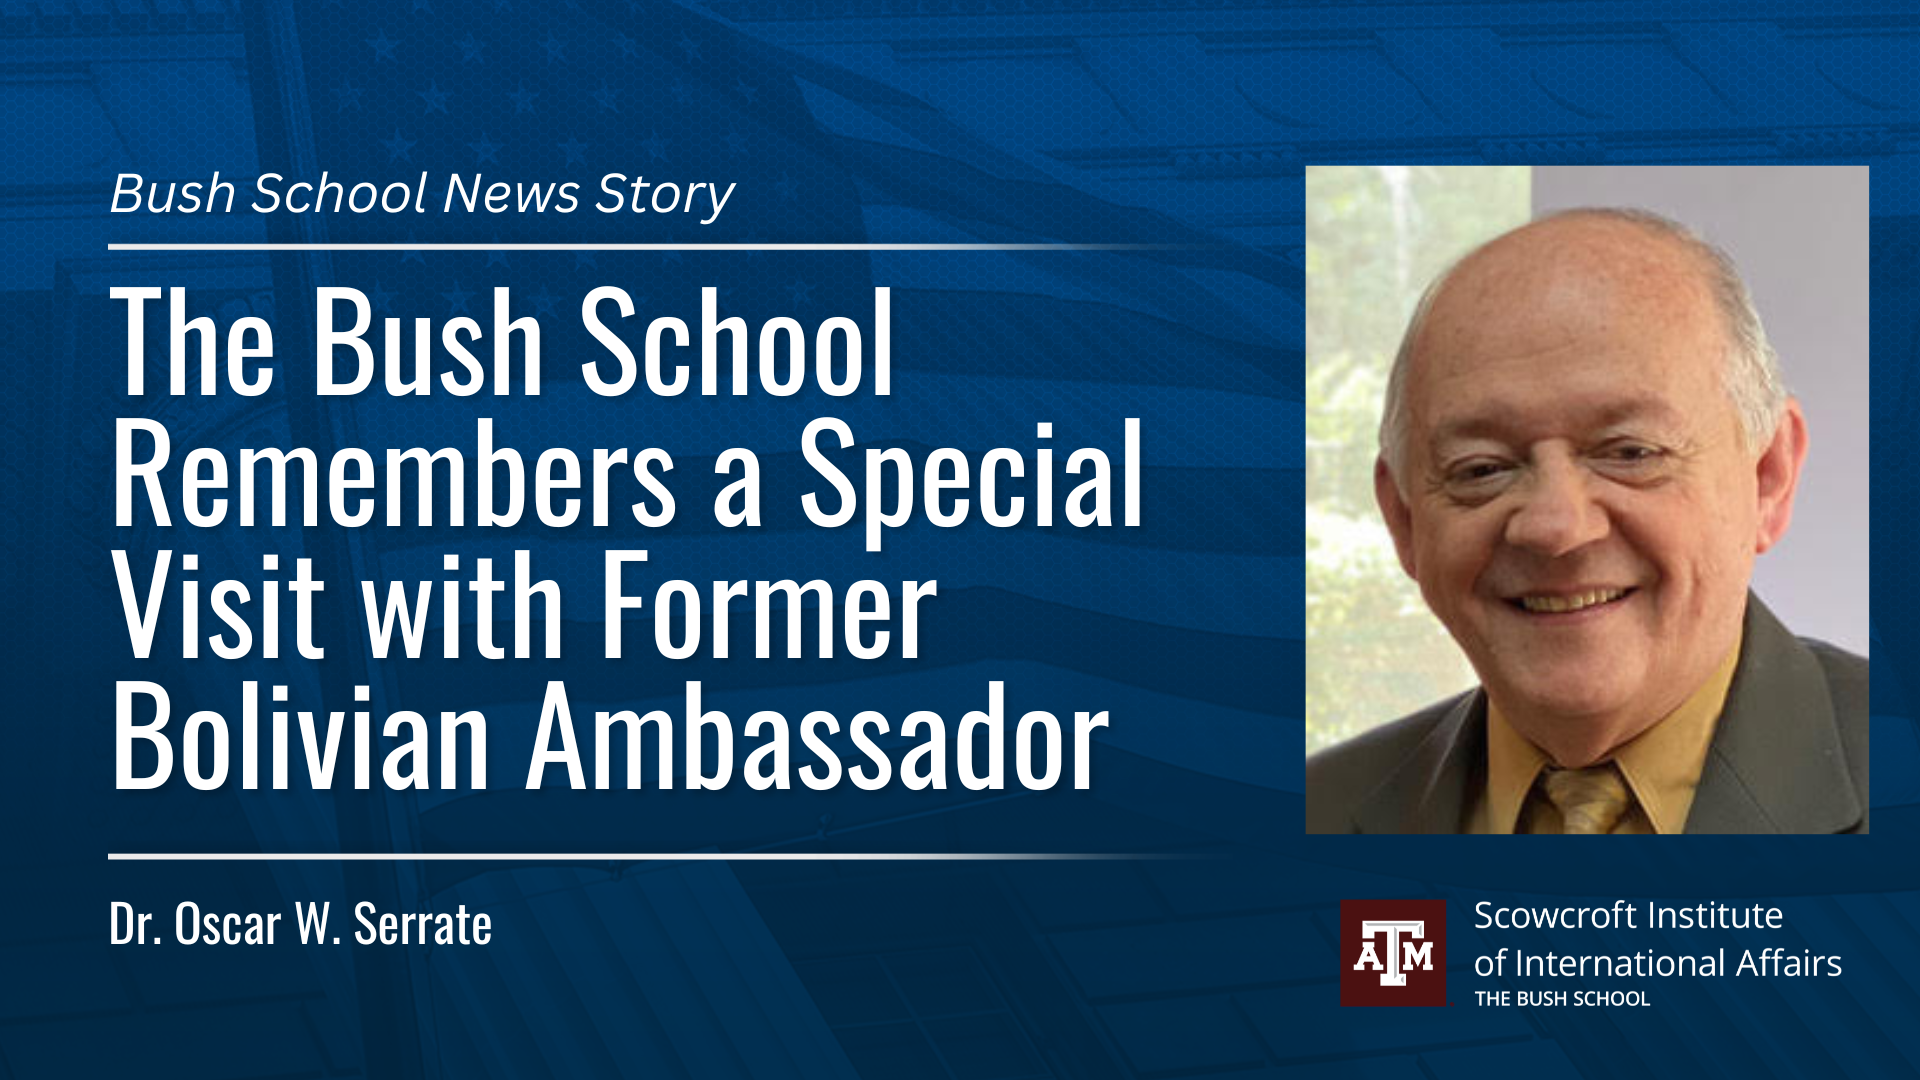 The Bush School Remembers a Special Visit with Former Bolivian Ambassador